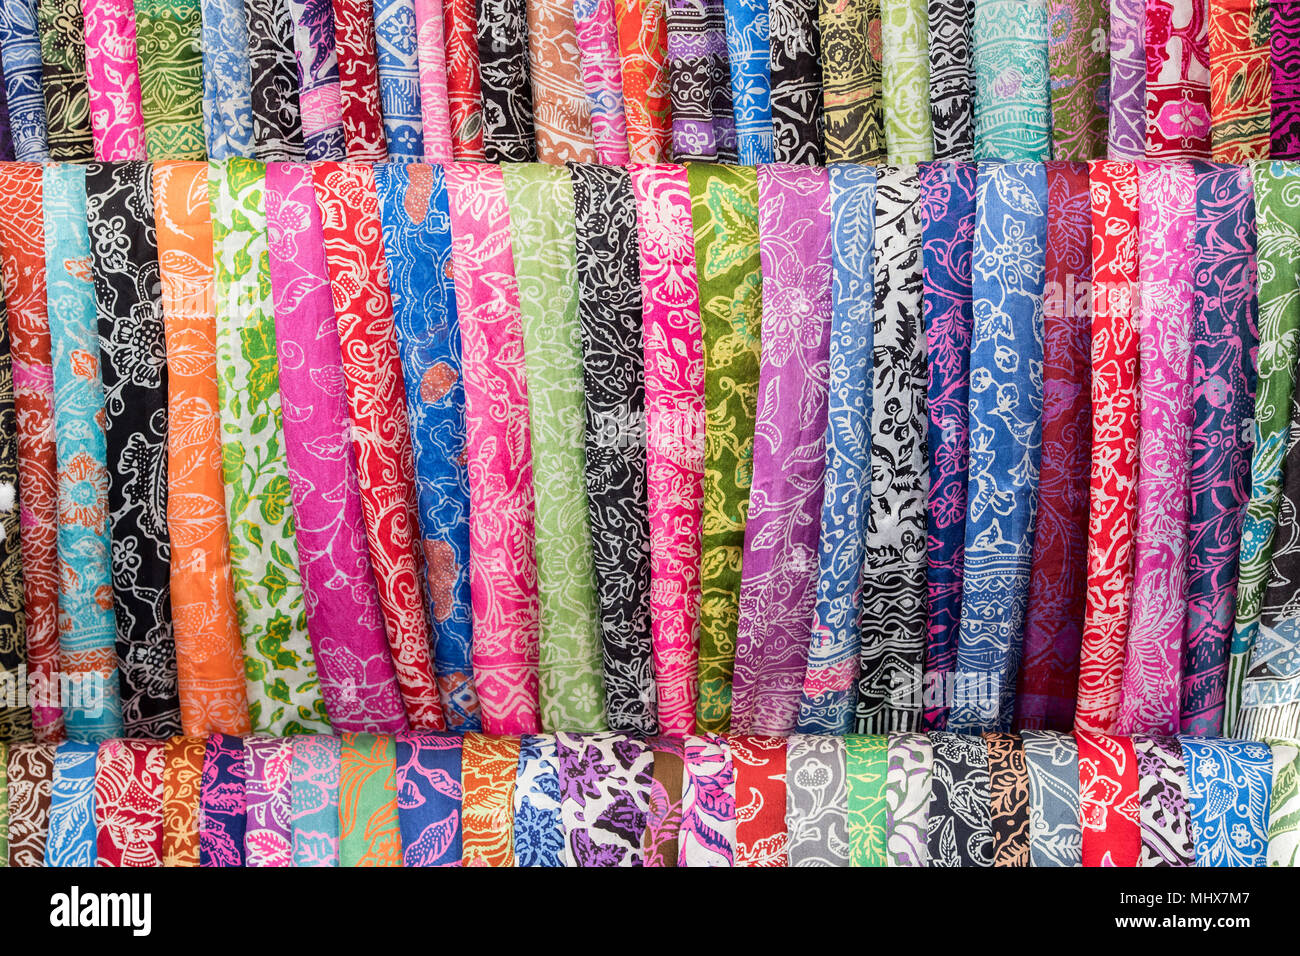 Batik indonesian silk cotton fabric tissue for sale on display at the market Stock Photo